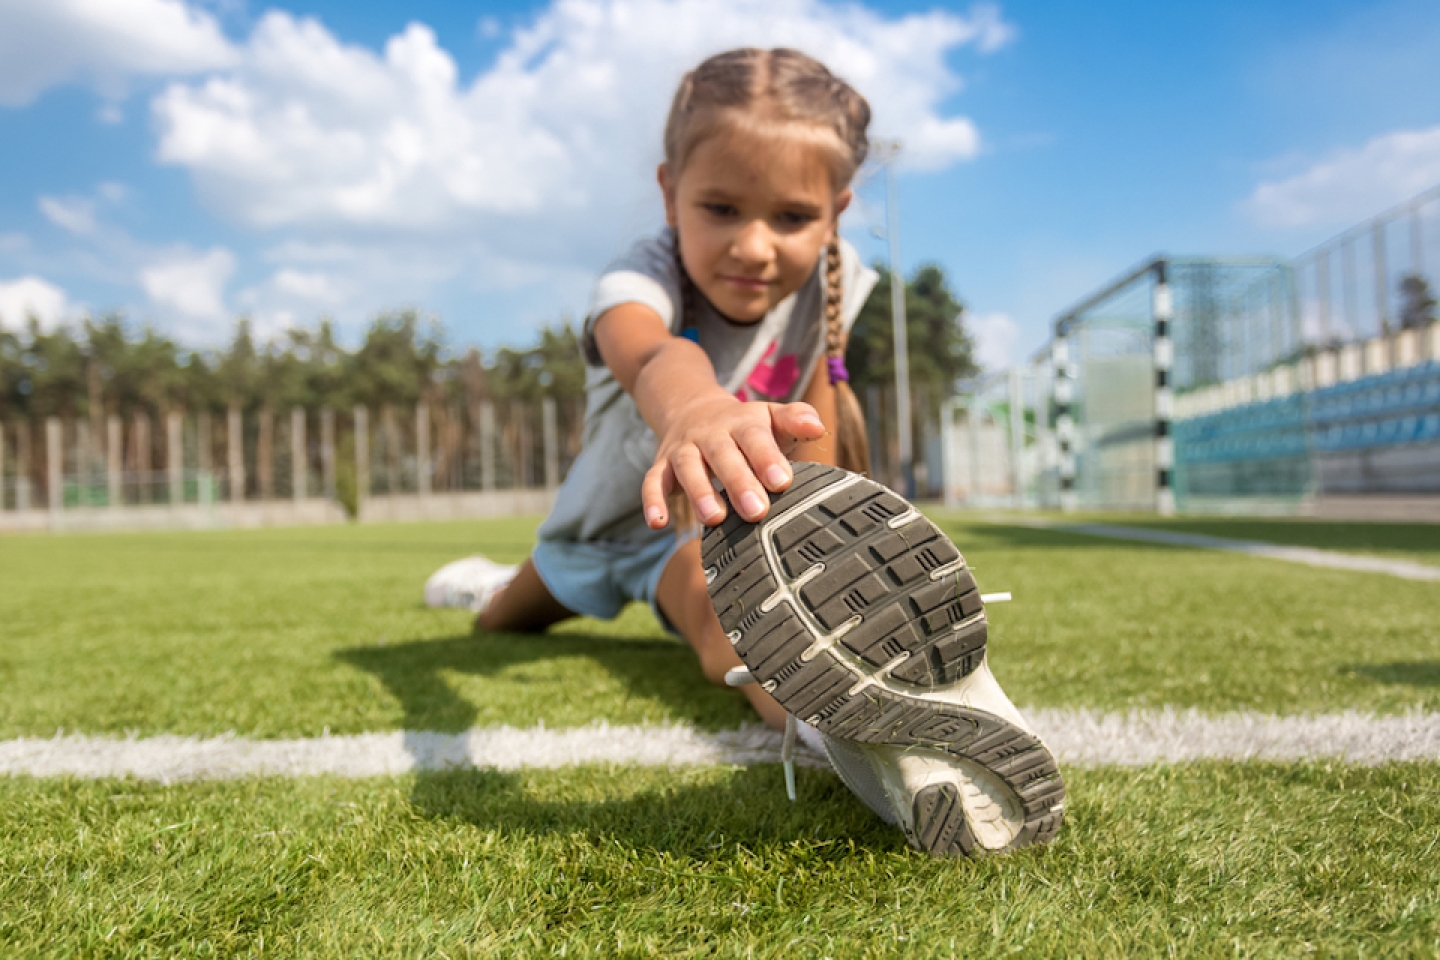 Closeup shot of young girl stretching legs on soccer field at sunny day